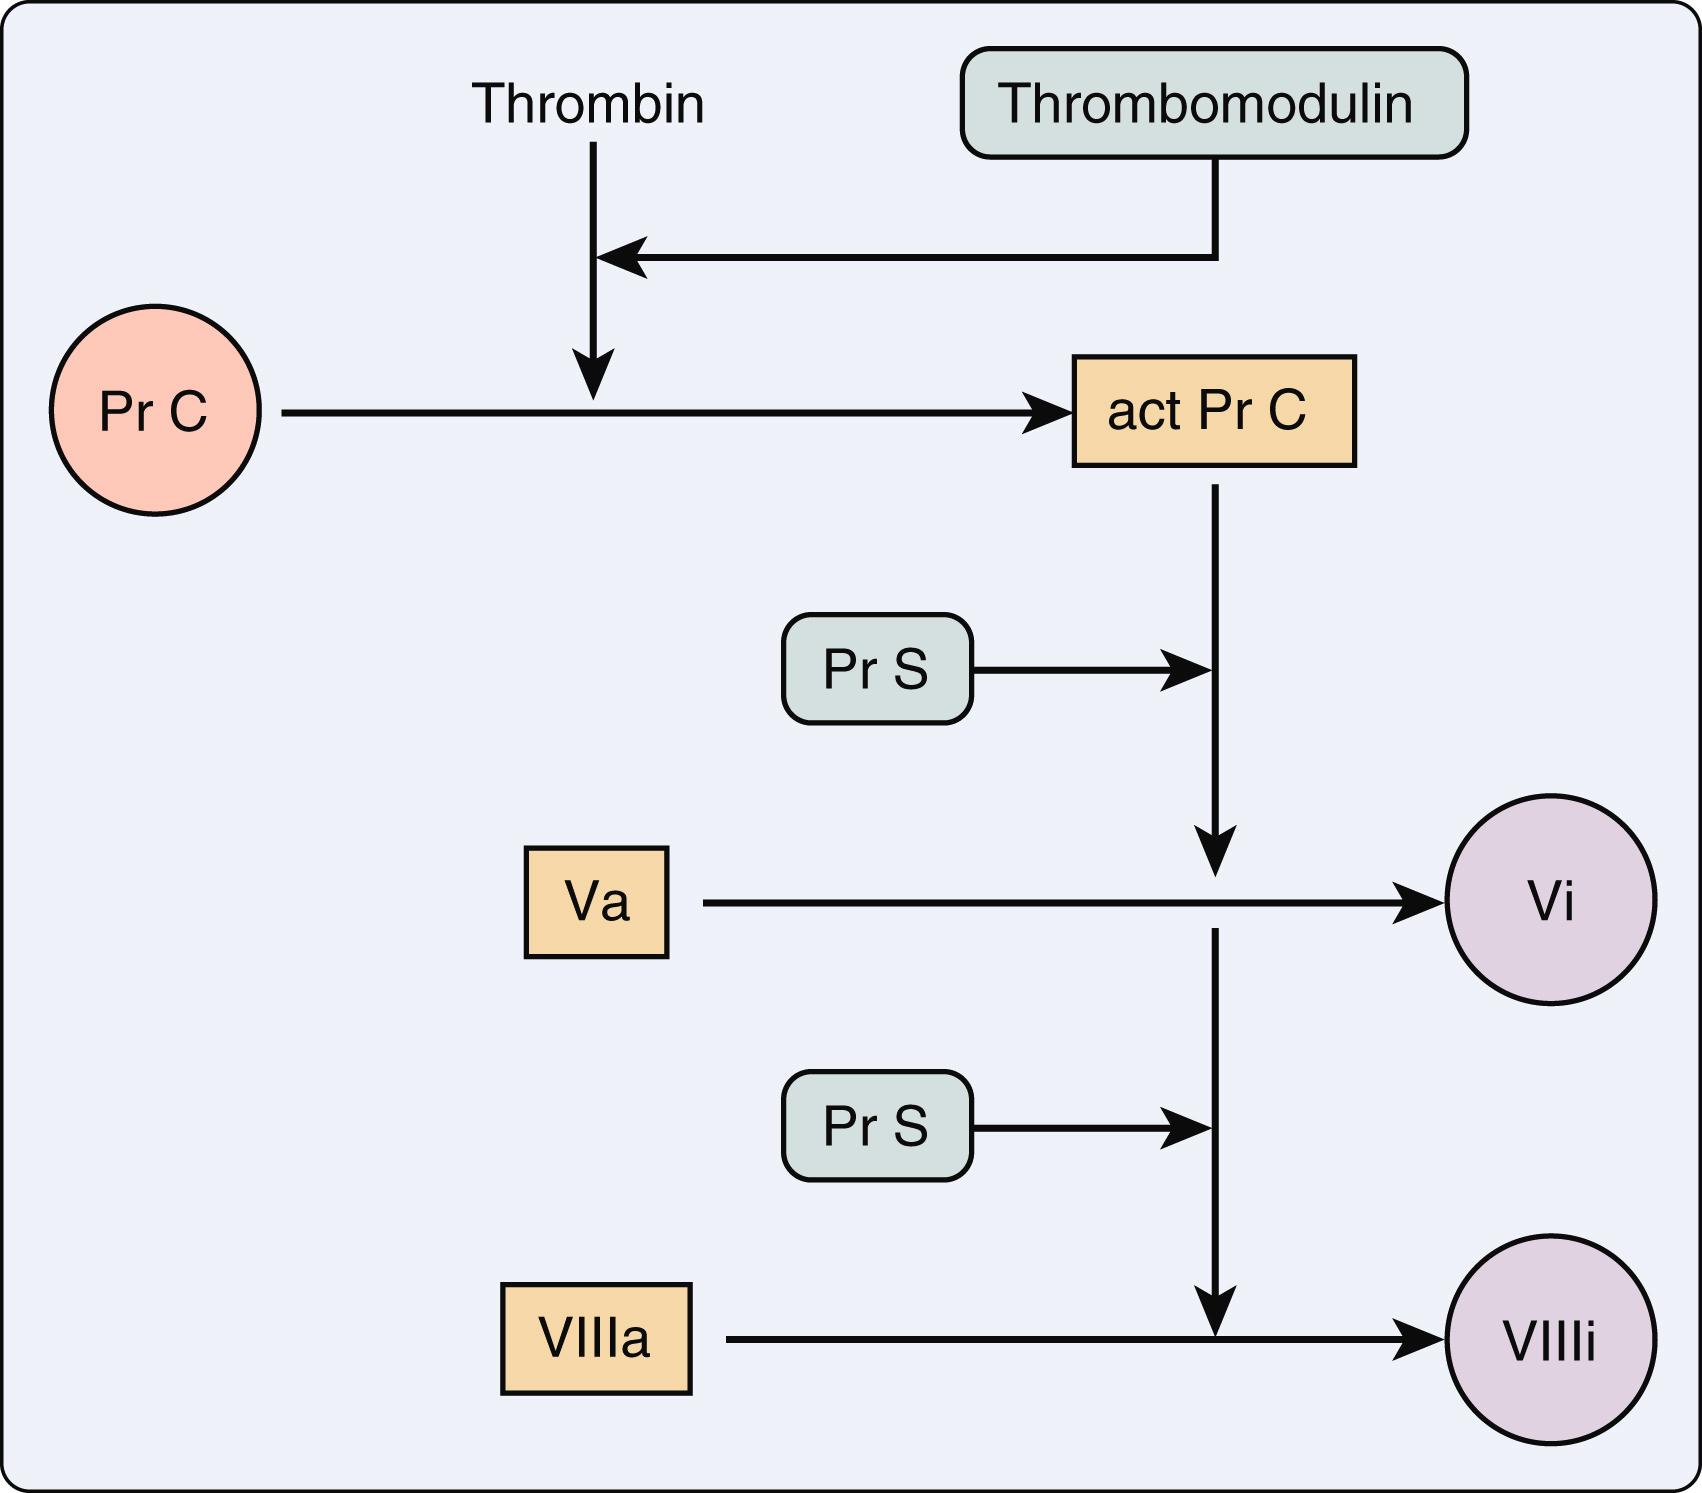 Figure 28.3, Modulators of coagulation. Thrombomodulin from endothelial cells accelerates thrombin activation of protein C (Pr C). In the presence of protein S (Pr S), activated protein C (act Pr C) inactivates factors V and VIII. Proteins C and S are vitamin K dependent. Va , Activated factor V; Vi , inactivated factor V; VIIIa , activated factor VIII; VIIIi , inactivated factor VIII.